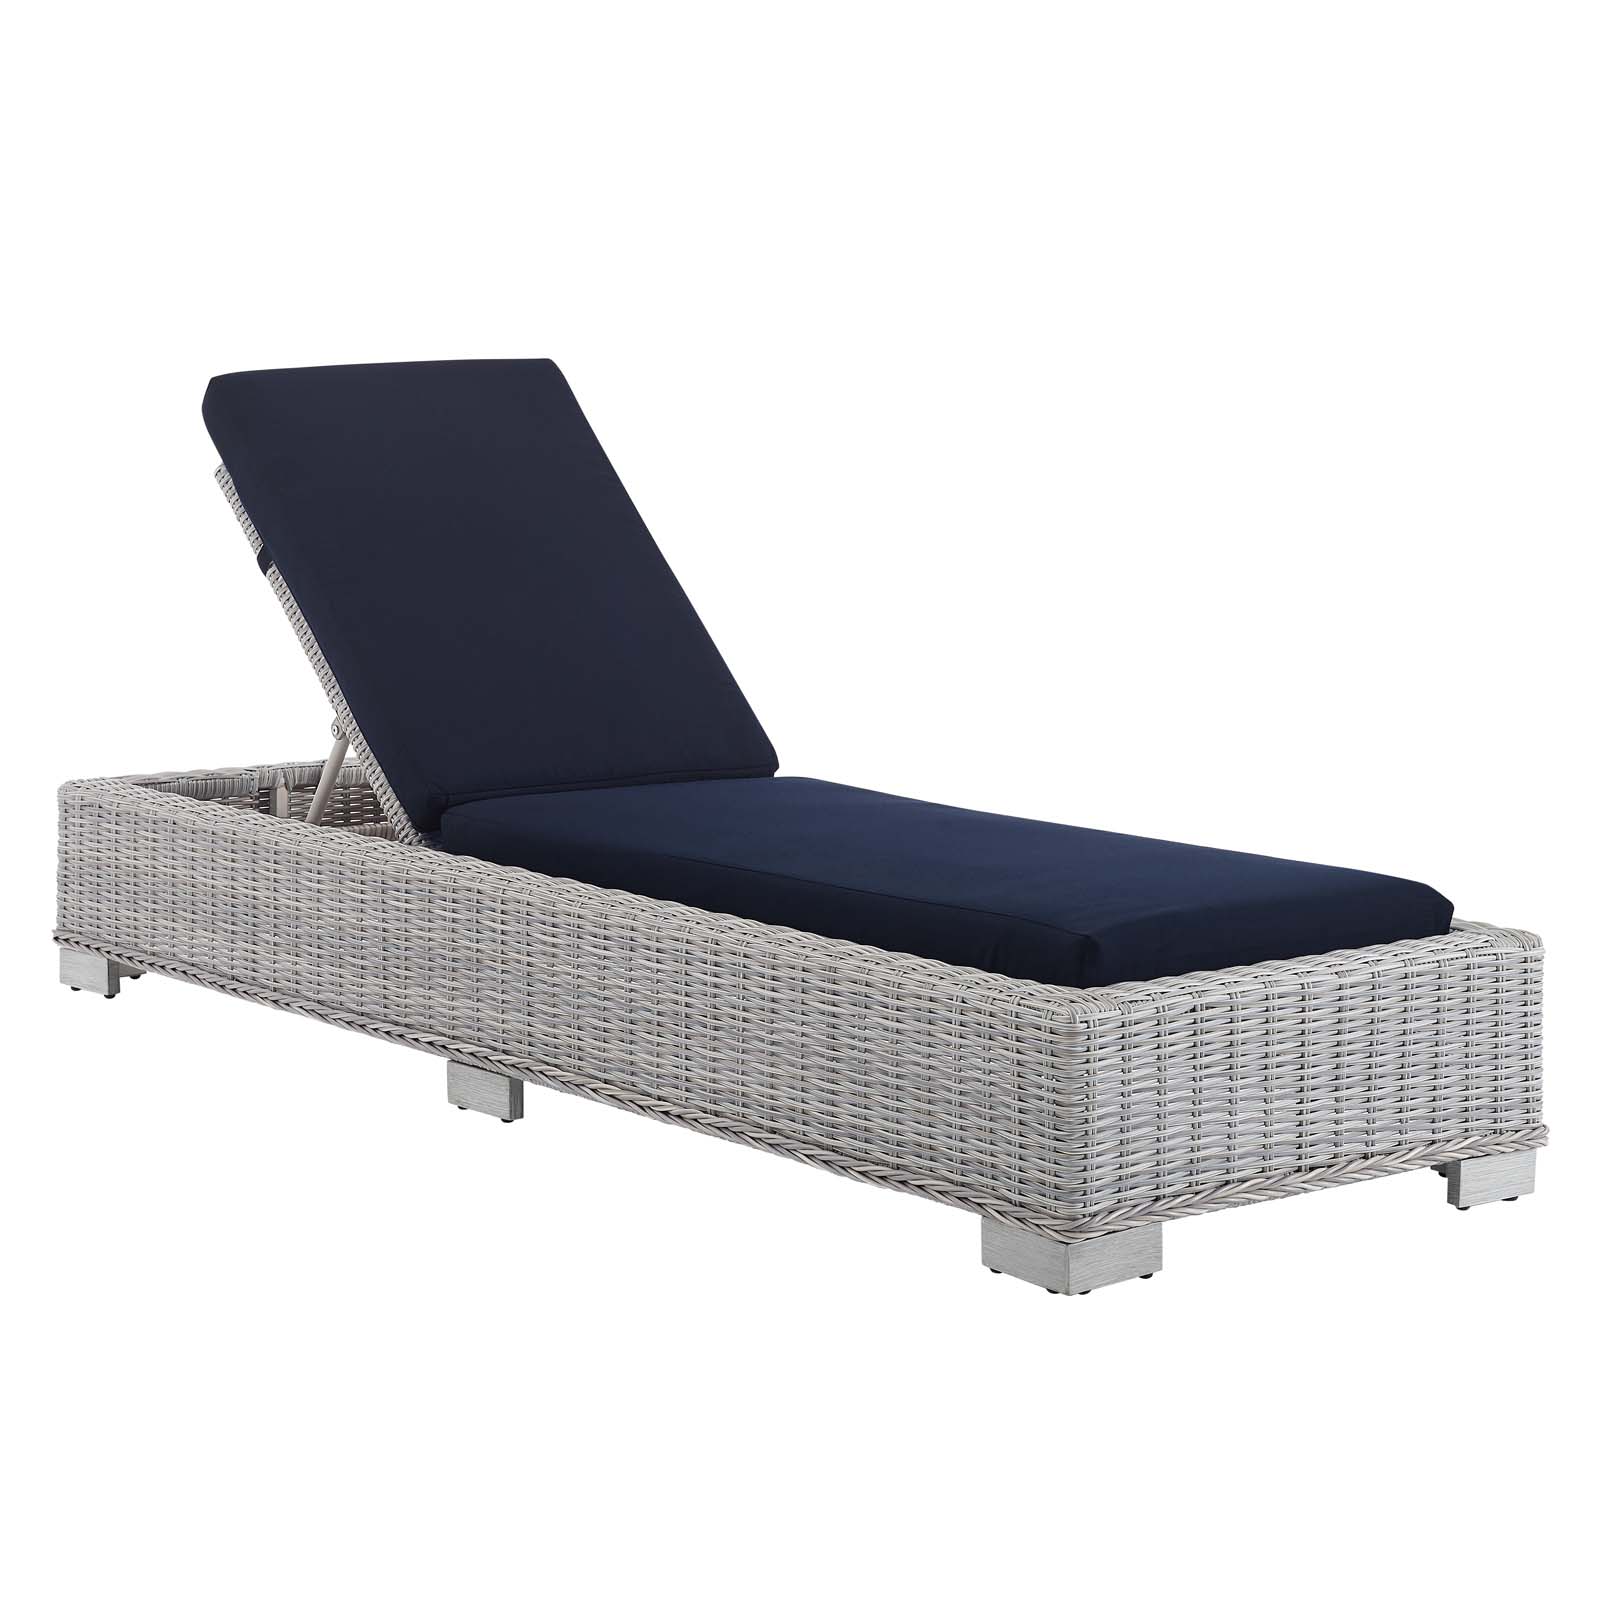 Modway Conway Sunbrella? Outdoor Patio Wicker Rattan Chaise Lounge in Light Gray Navy - image 2 of 10